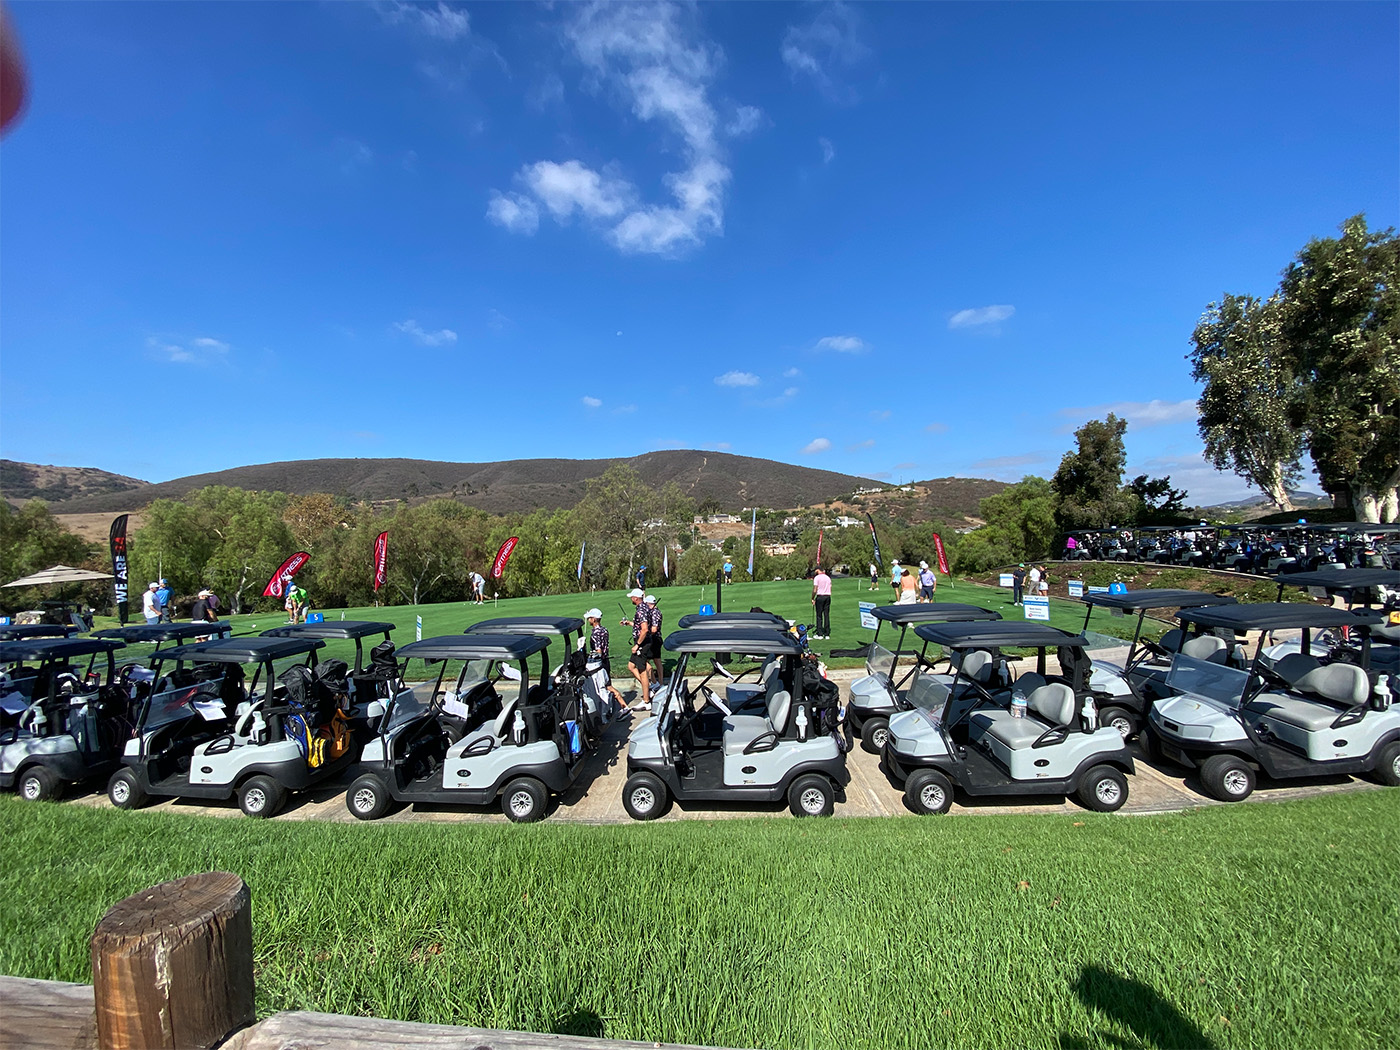 many golf carts parked next to the golf course with golfers nearby